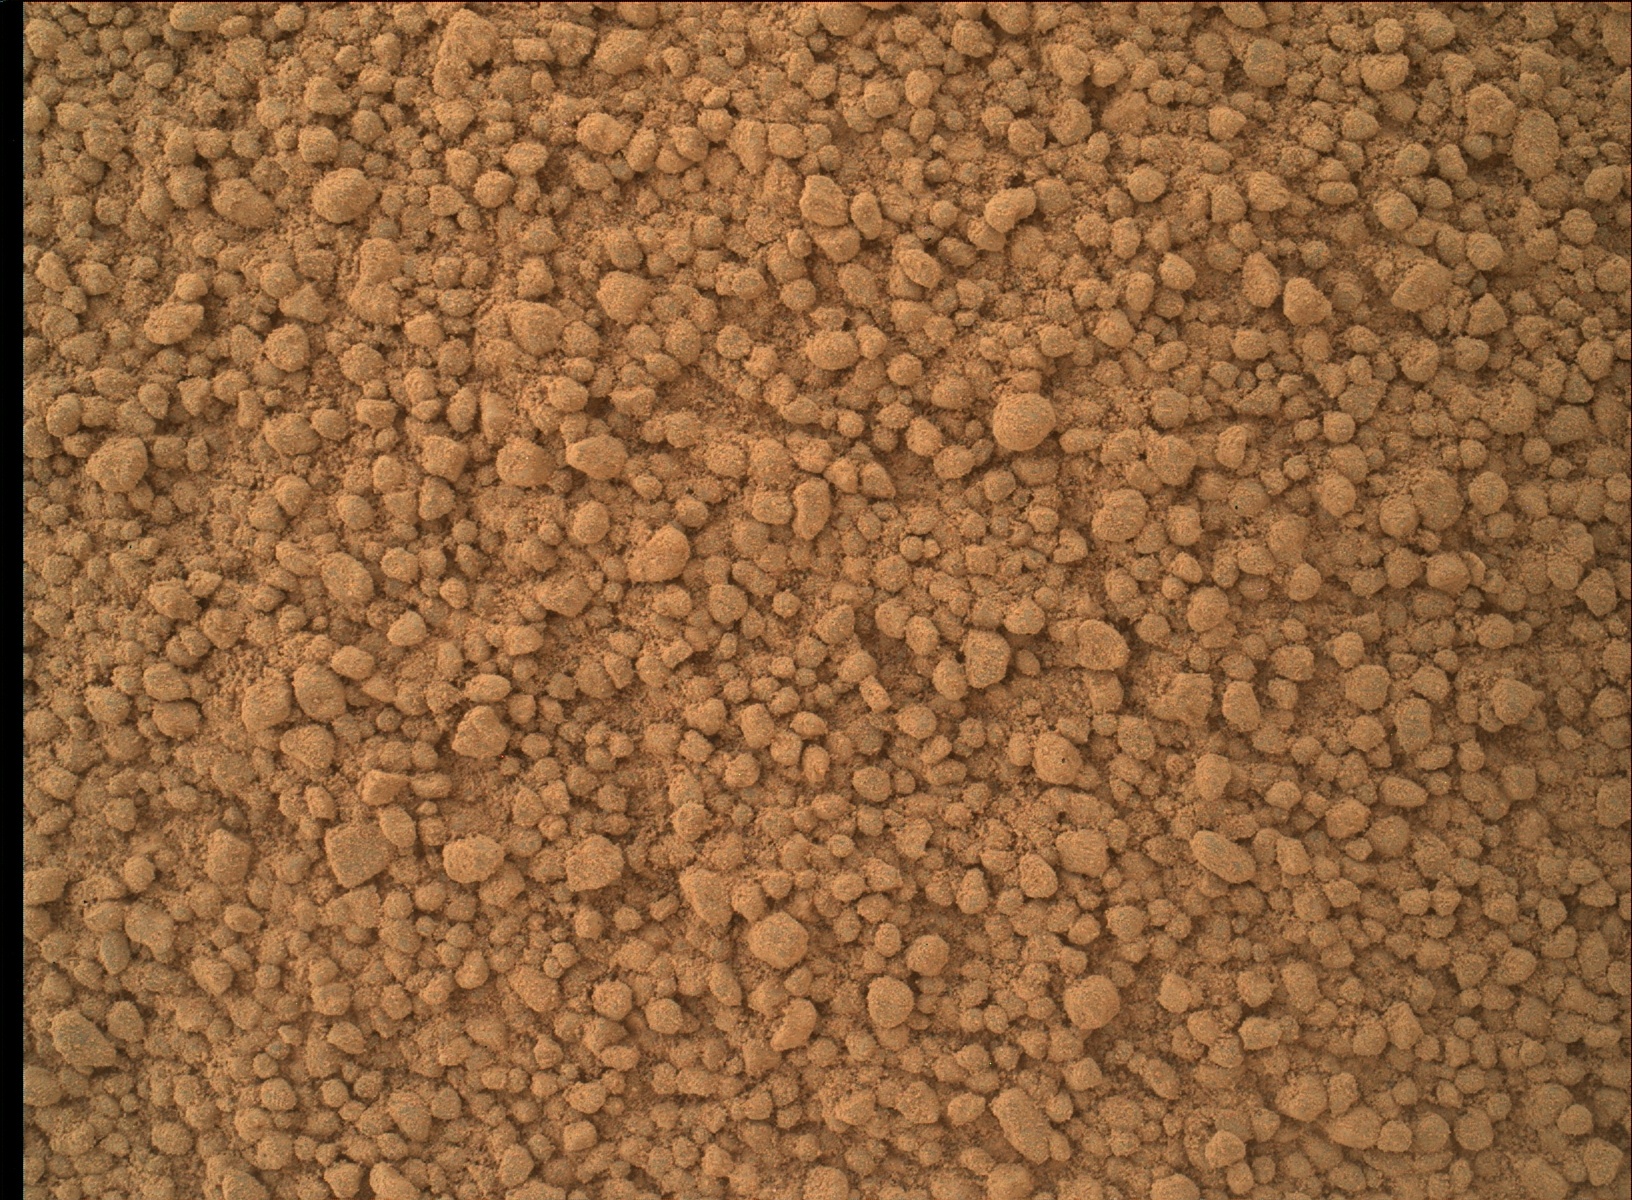 Nasa's Mars rover Curiosity acquired this image using its Mars Hand Lens Imager (MAHLI) on Sol 93